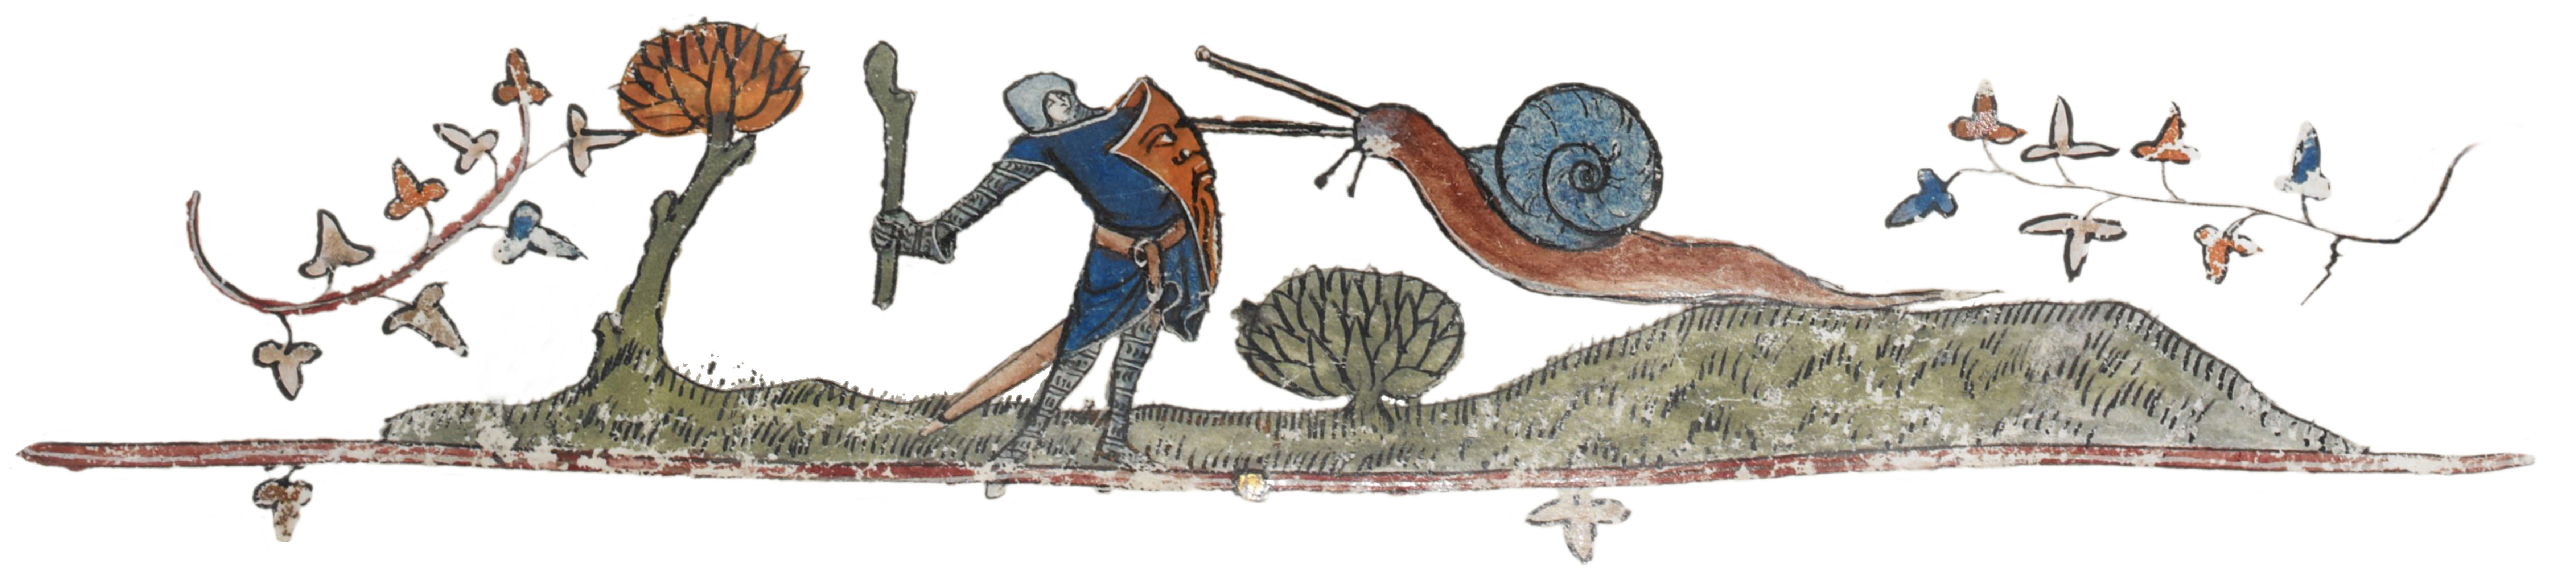 Medieval knight fighting with snail